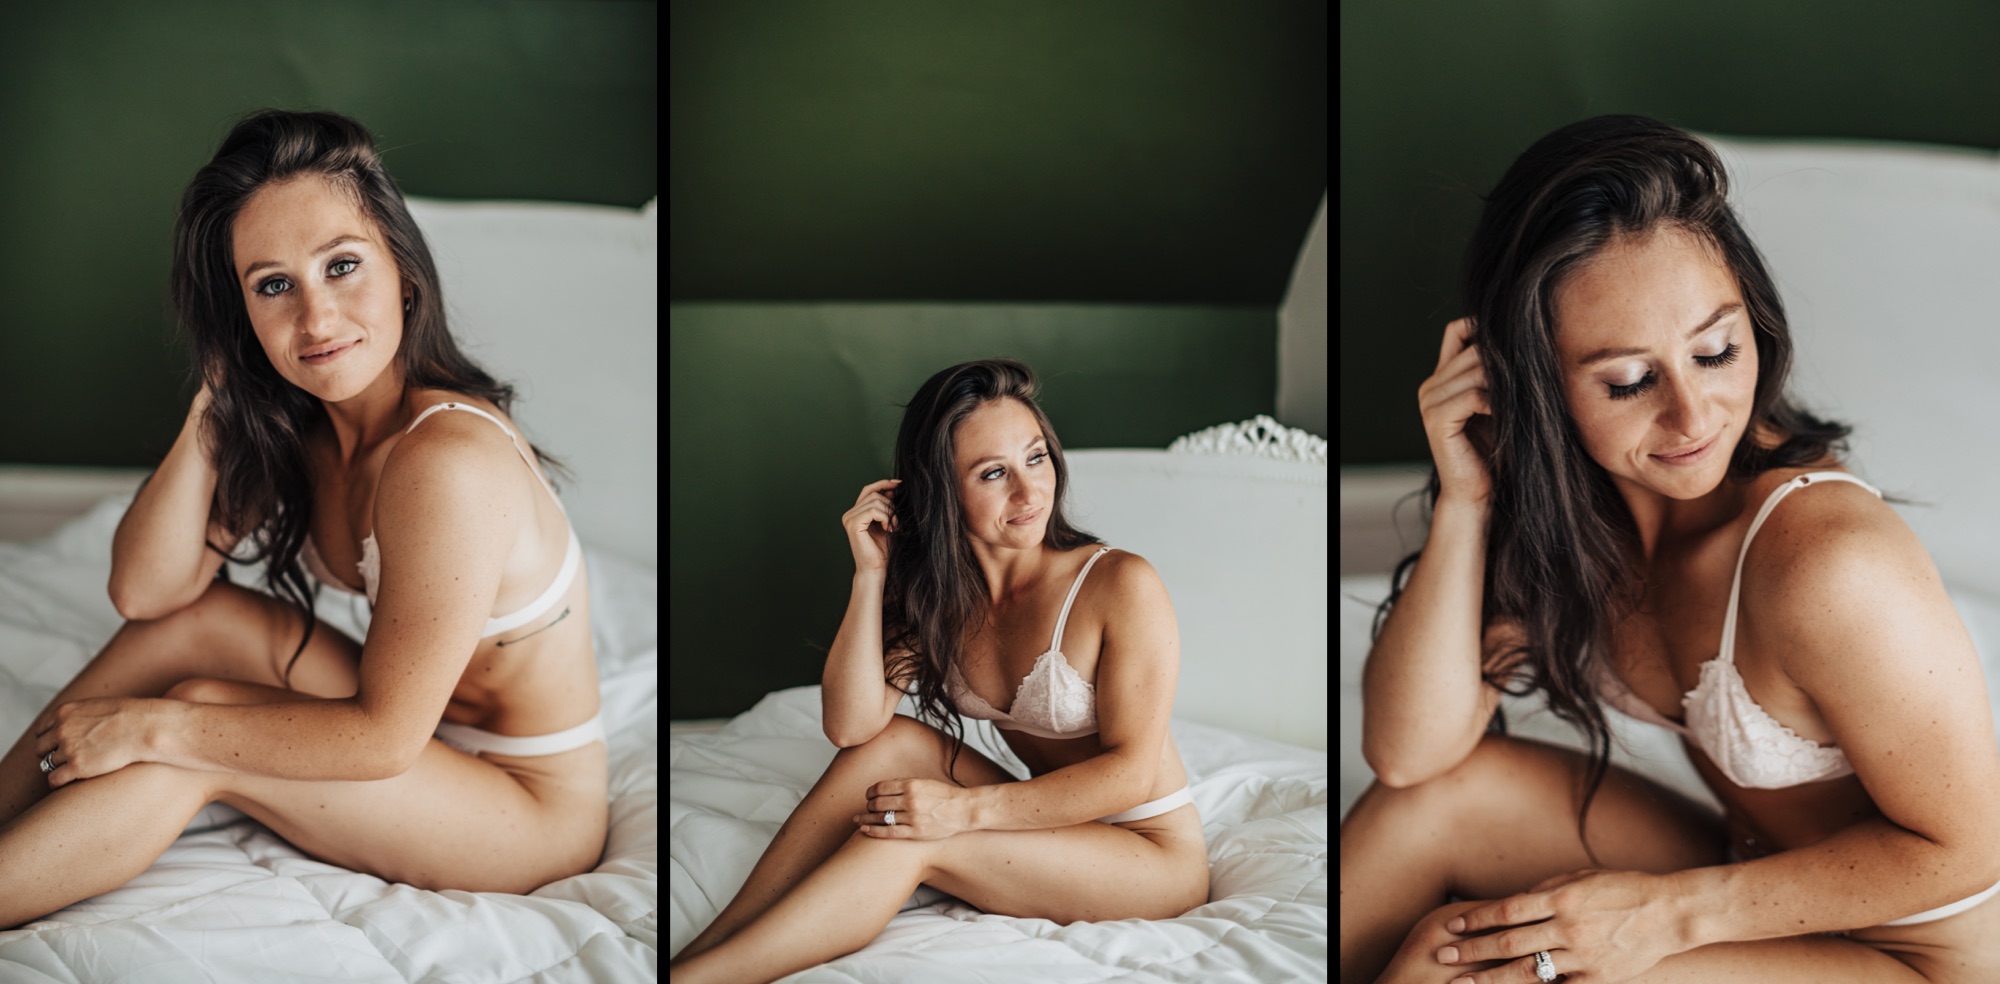 Morgans Intimate Boudoir Session at the Hive House Studio in Stillwater Minnesota